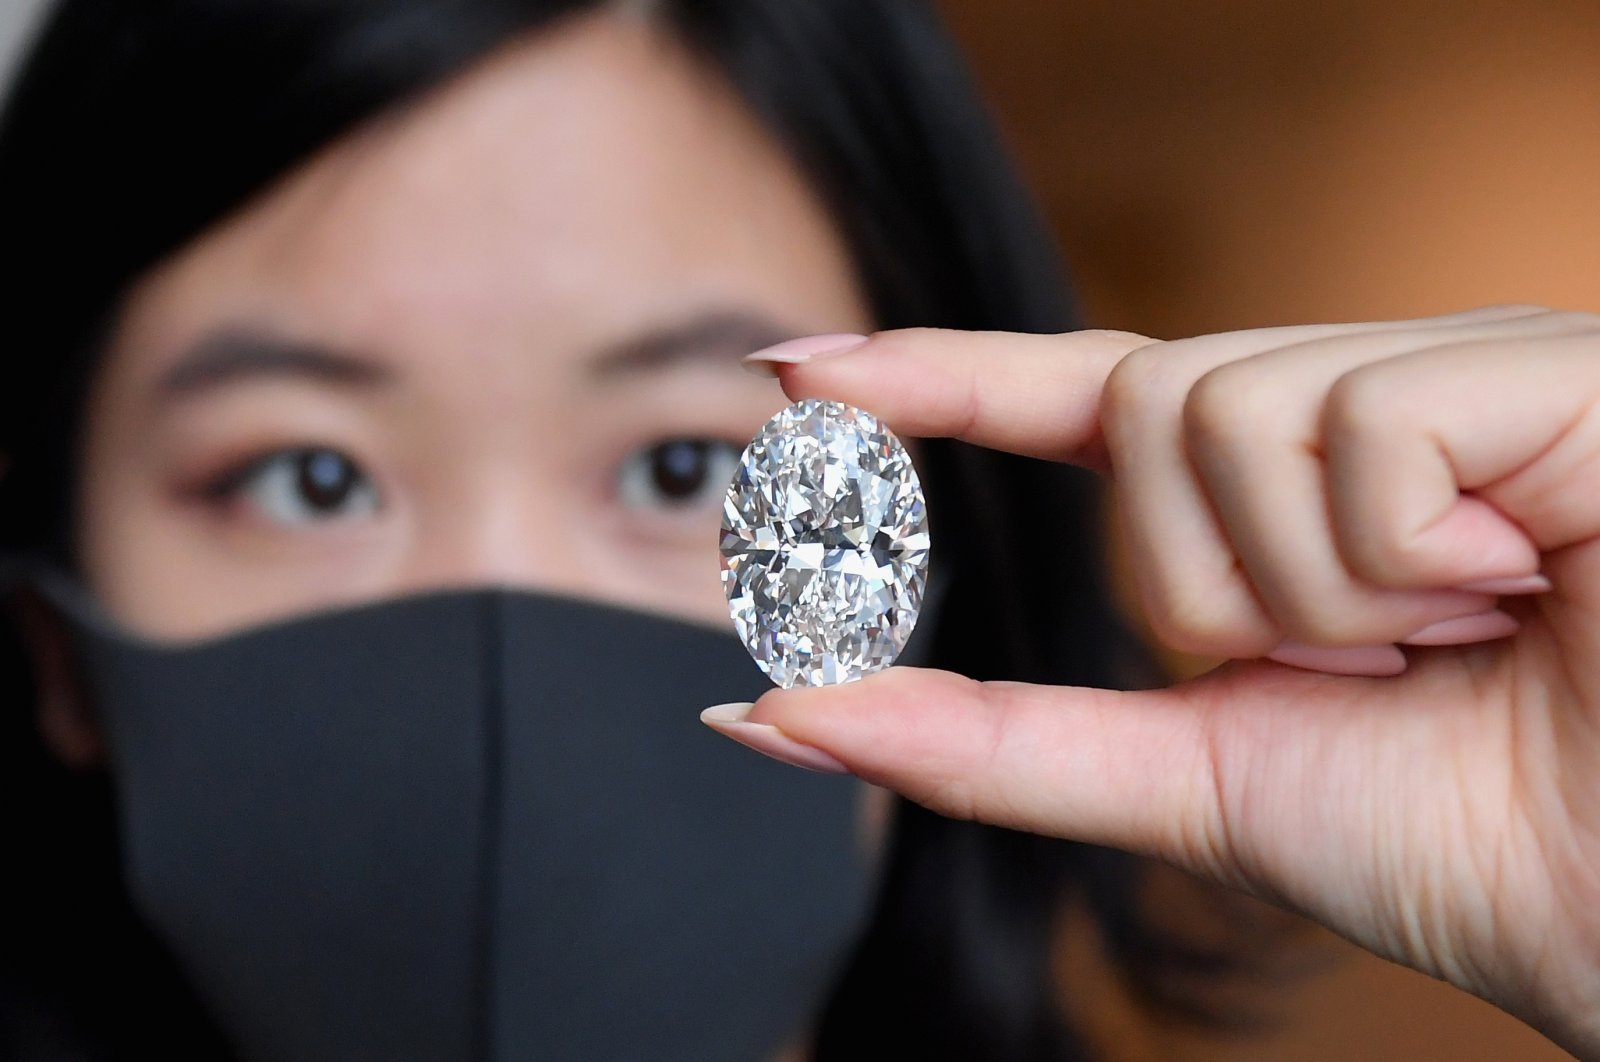 A Sotheby's employee holds a 102.39-carat flawless oval diamond during a media preview at Sotheby's, New York City, New York, U.S., Sept. 9, 2020. (AFP Photo)